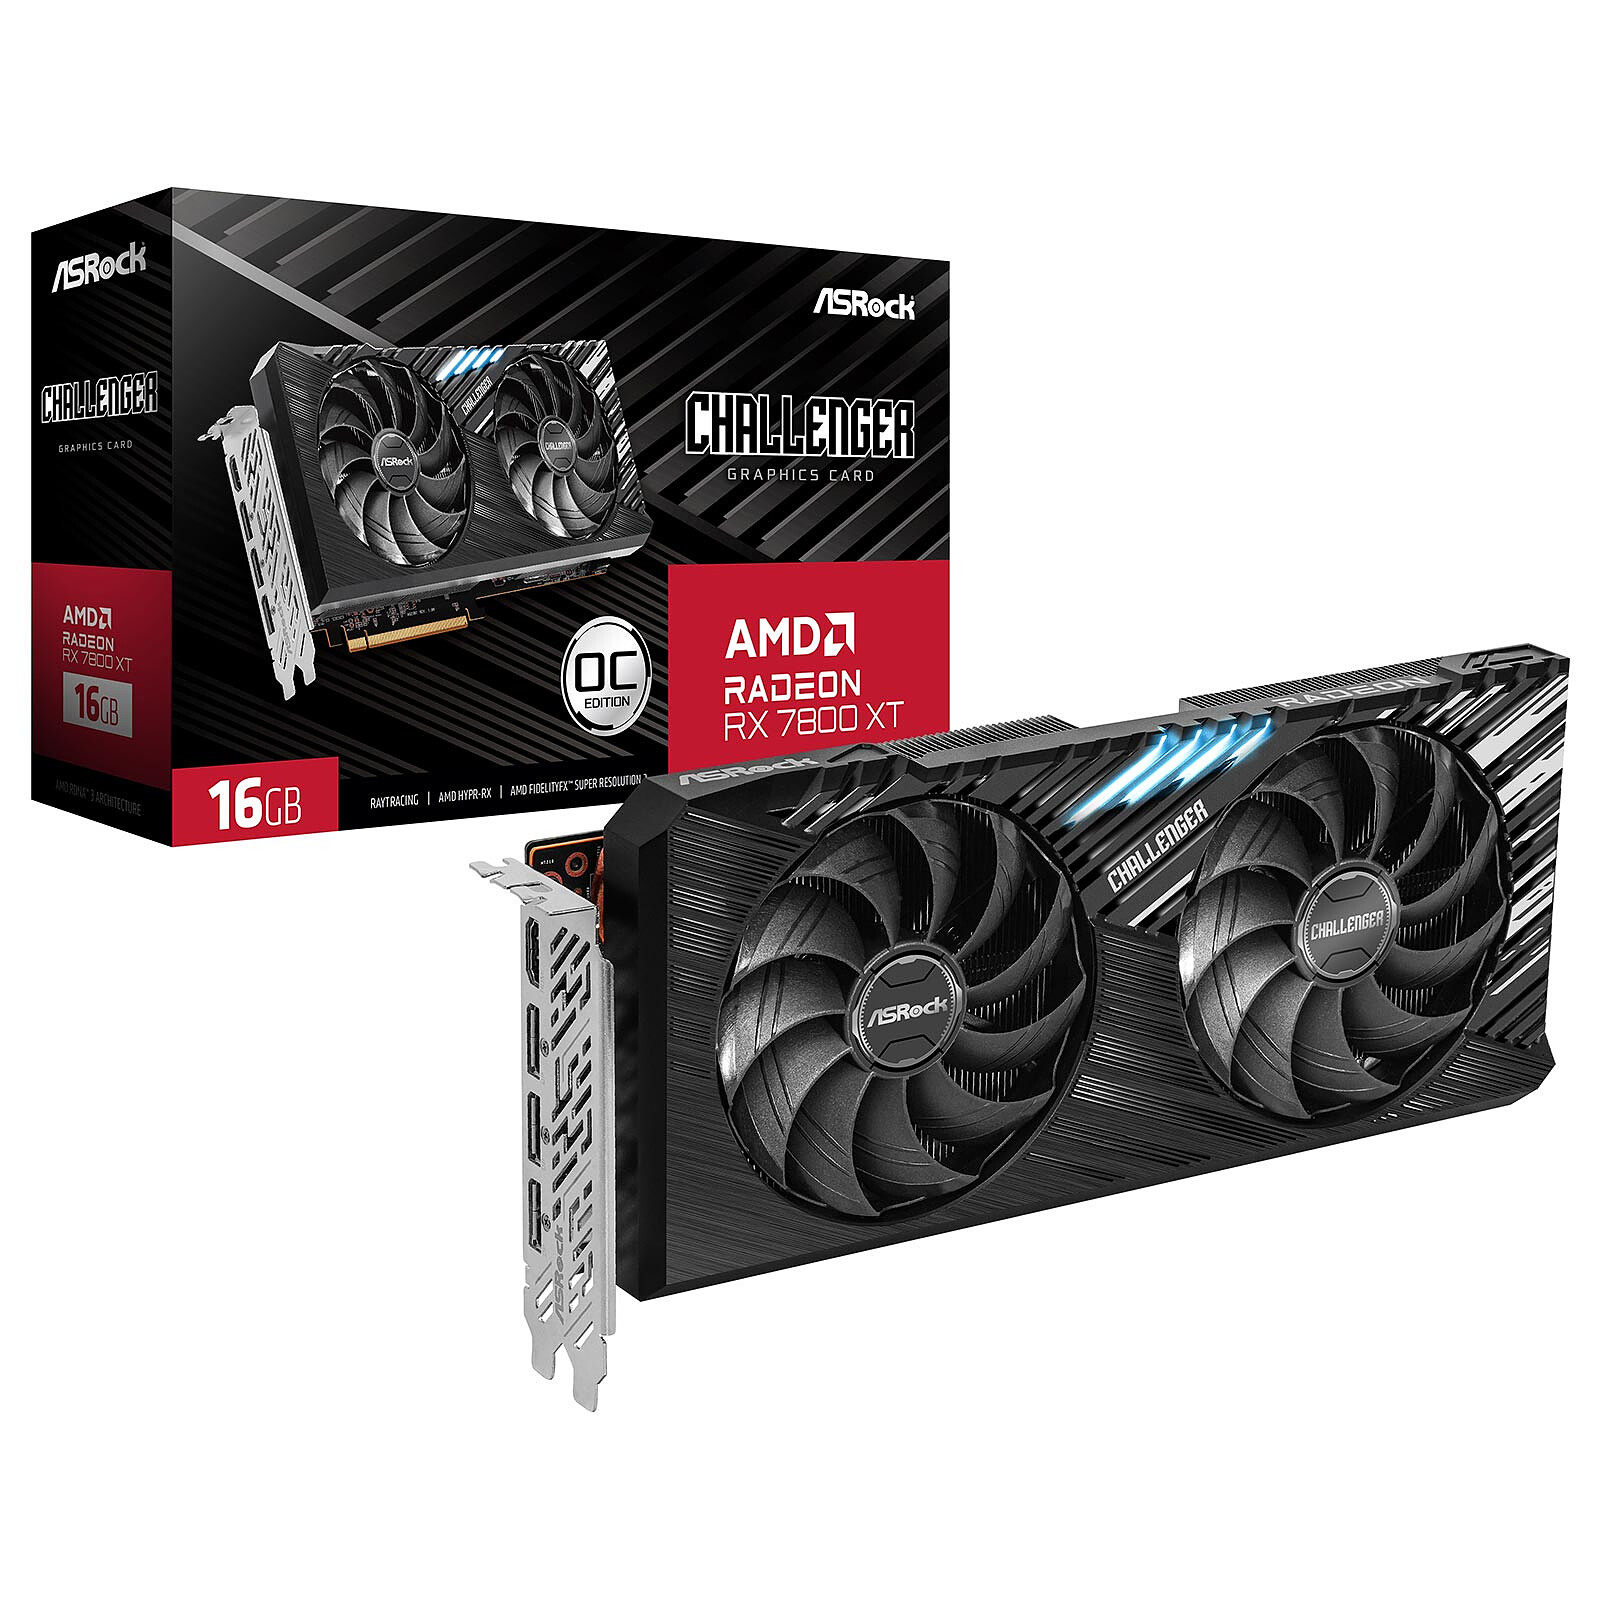 RX 7800 XT In Stock Availability and Price Tracking